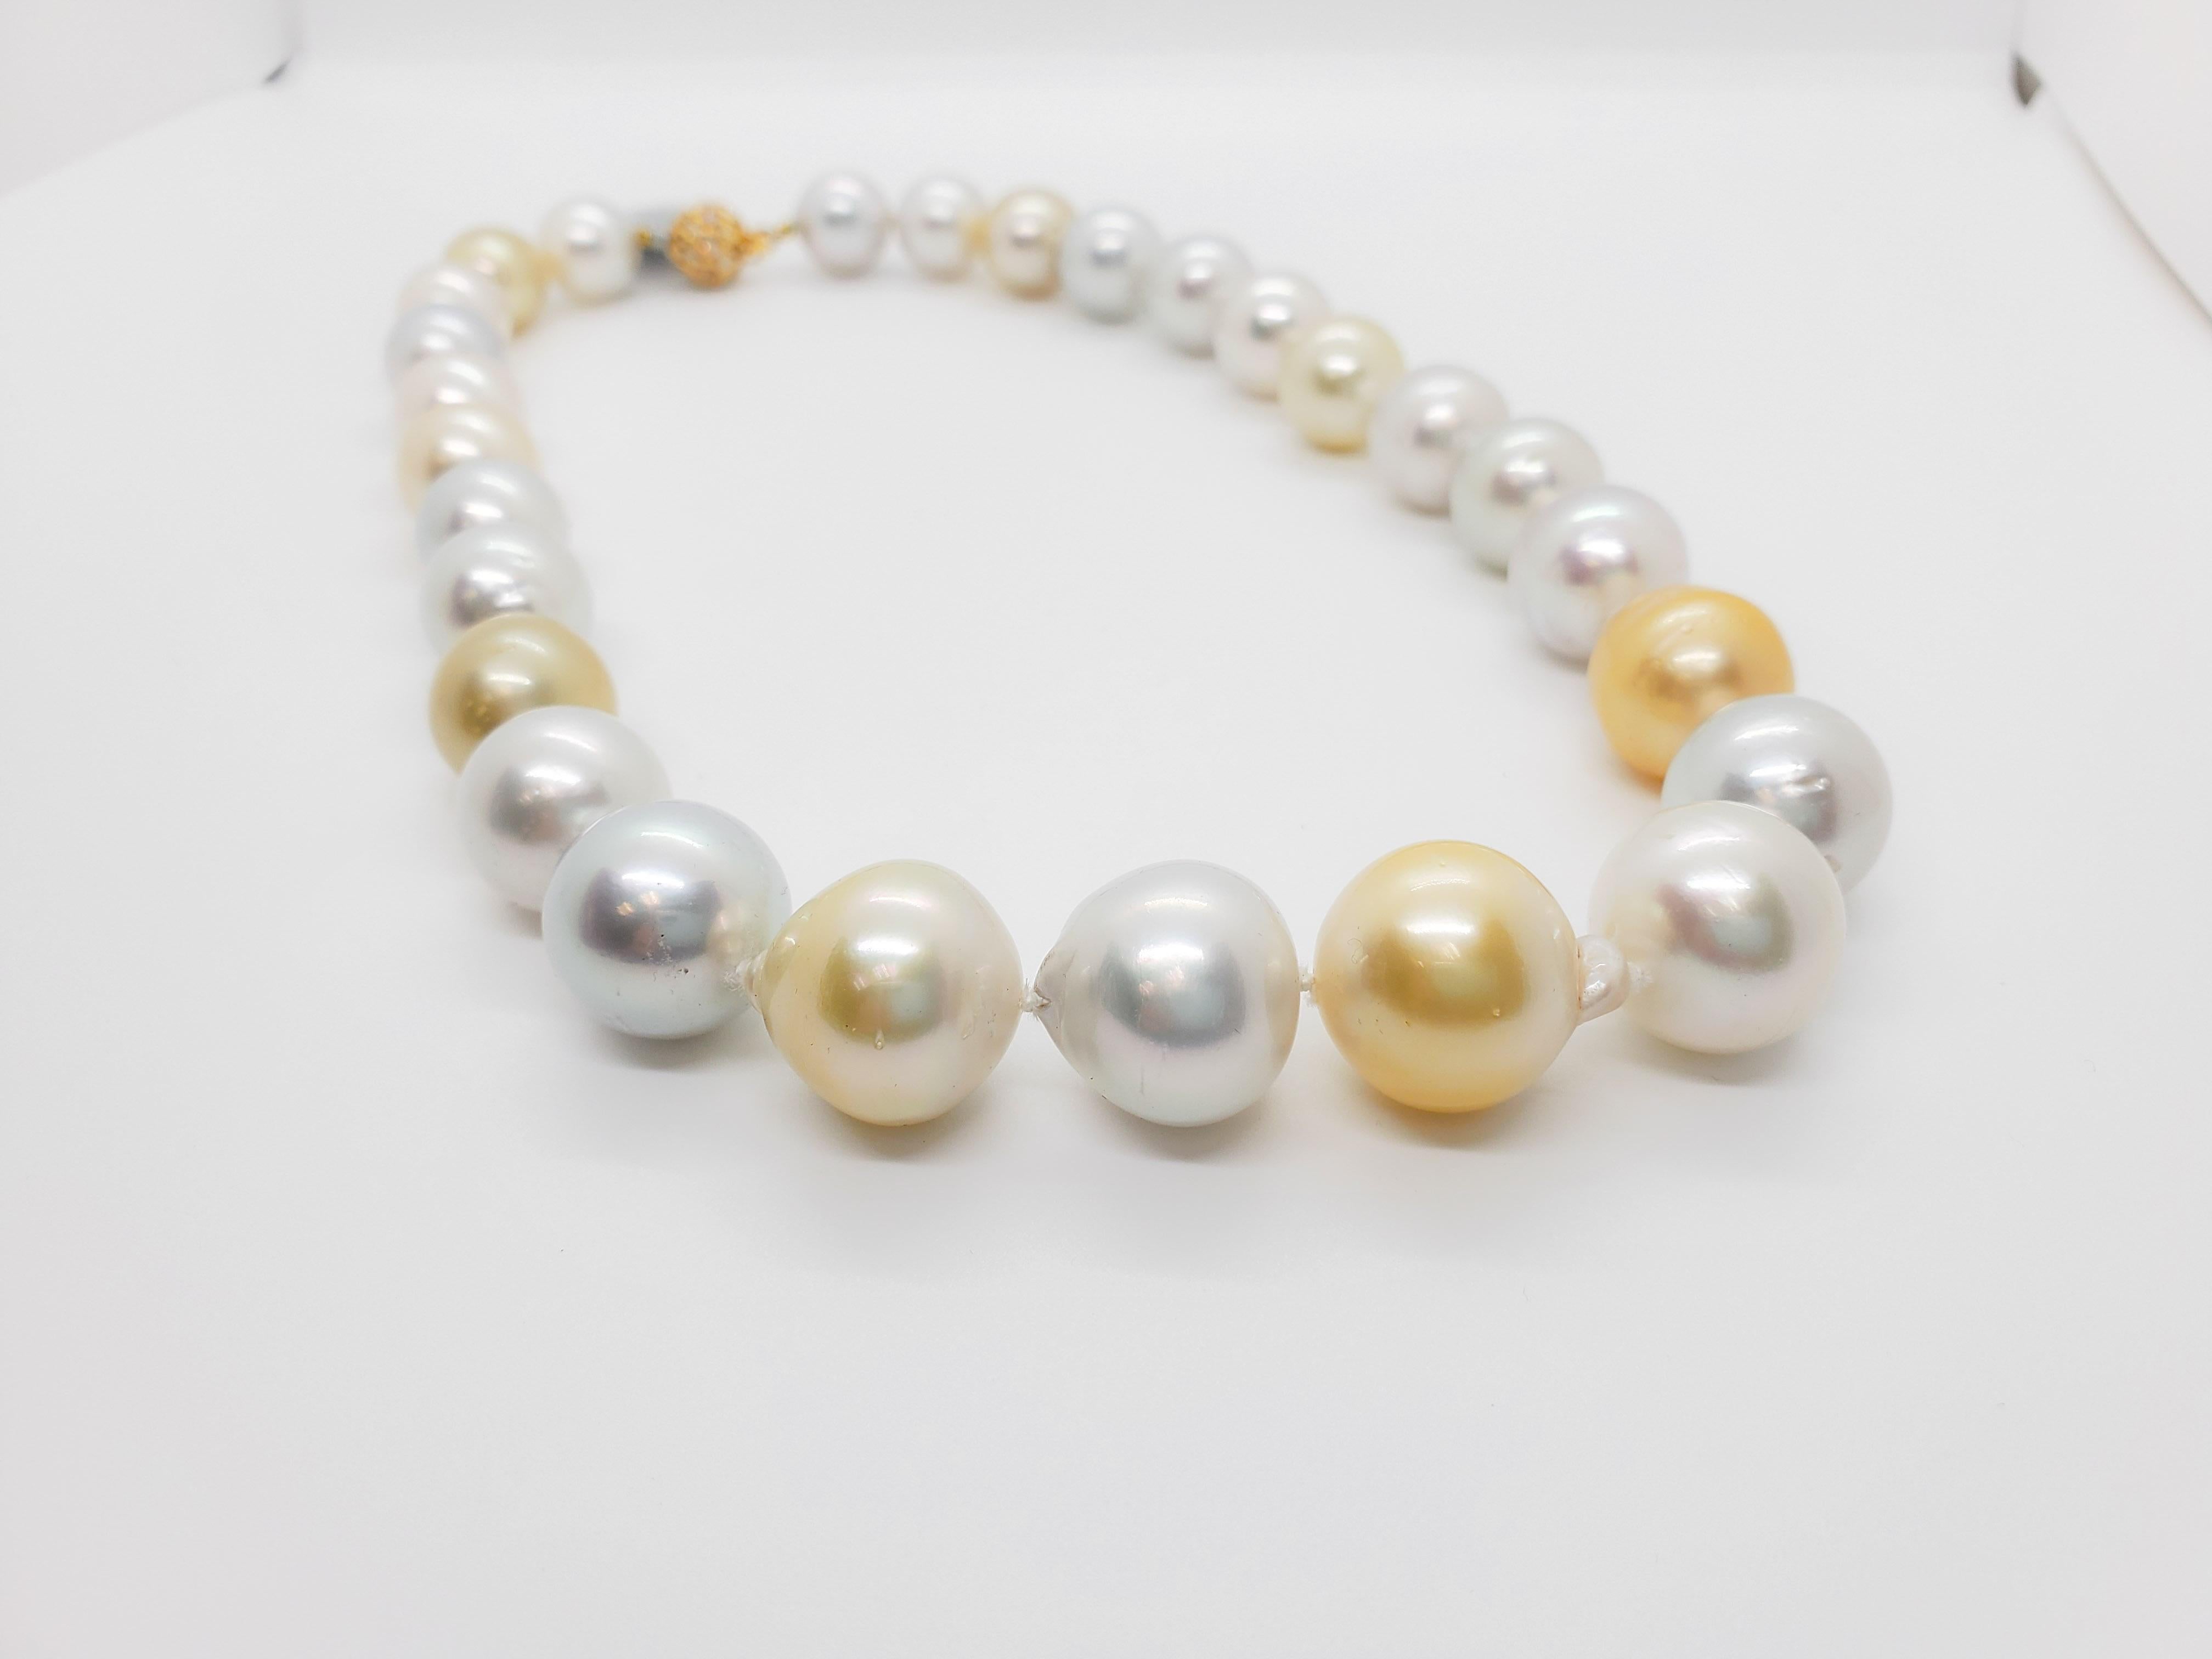 Beautiful necklace showcasing 27 white and yellow South Sea pearls and 0.50 ct. of white diamond rounds in a 18k yellow gold clasp.  Superb luster and minimal to no blemishes. The alternating white and yellow pearls make this classic necklace unique